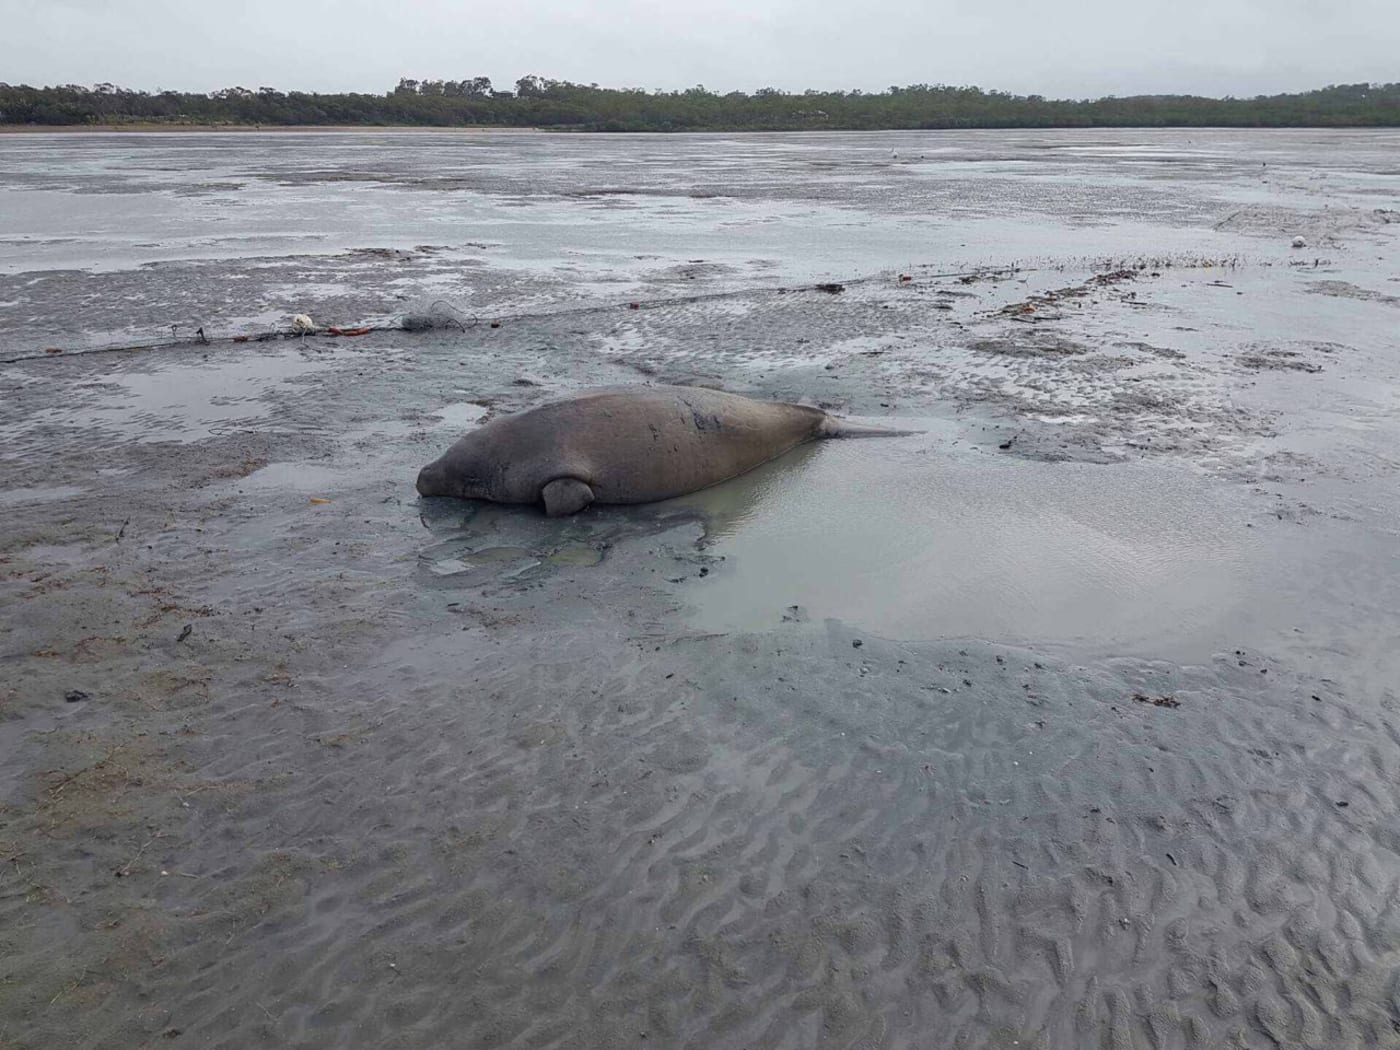 Dugong accidentally caught in gill net, near Mackay, Queensland, April 2018.